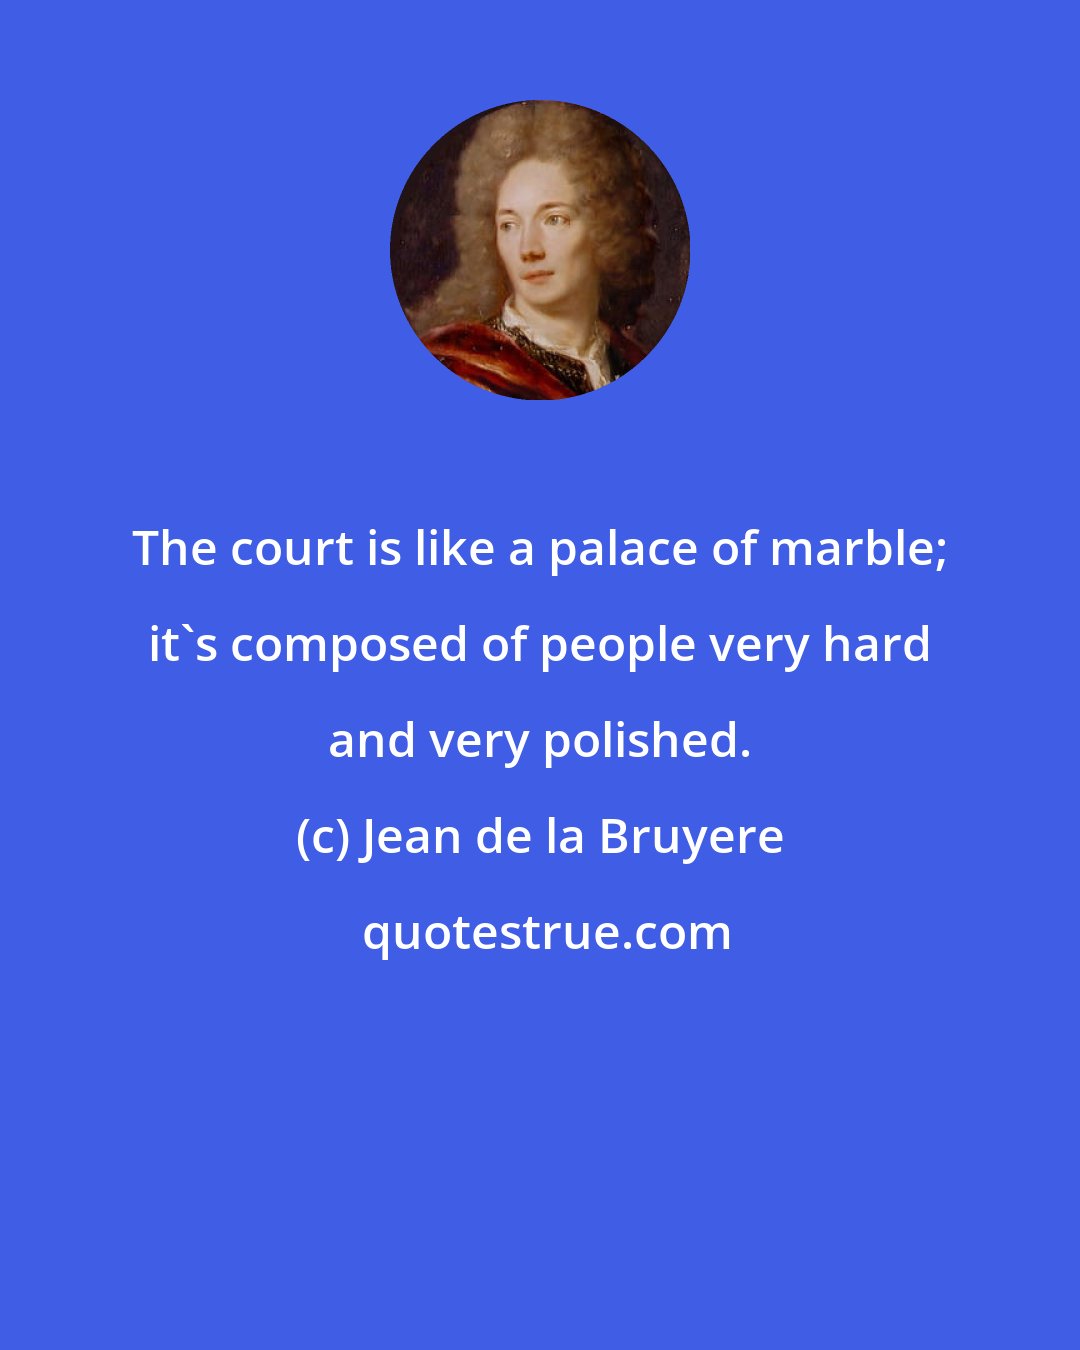 Jean de la Bruyere: The court is like a palace of marble; it's composed of people very hard and very polished.